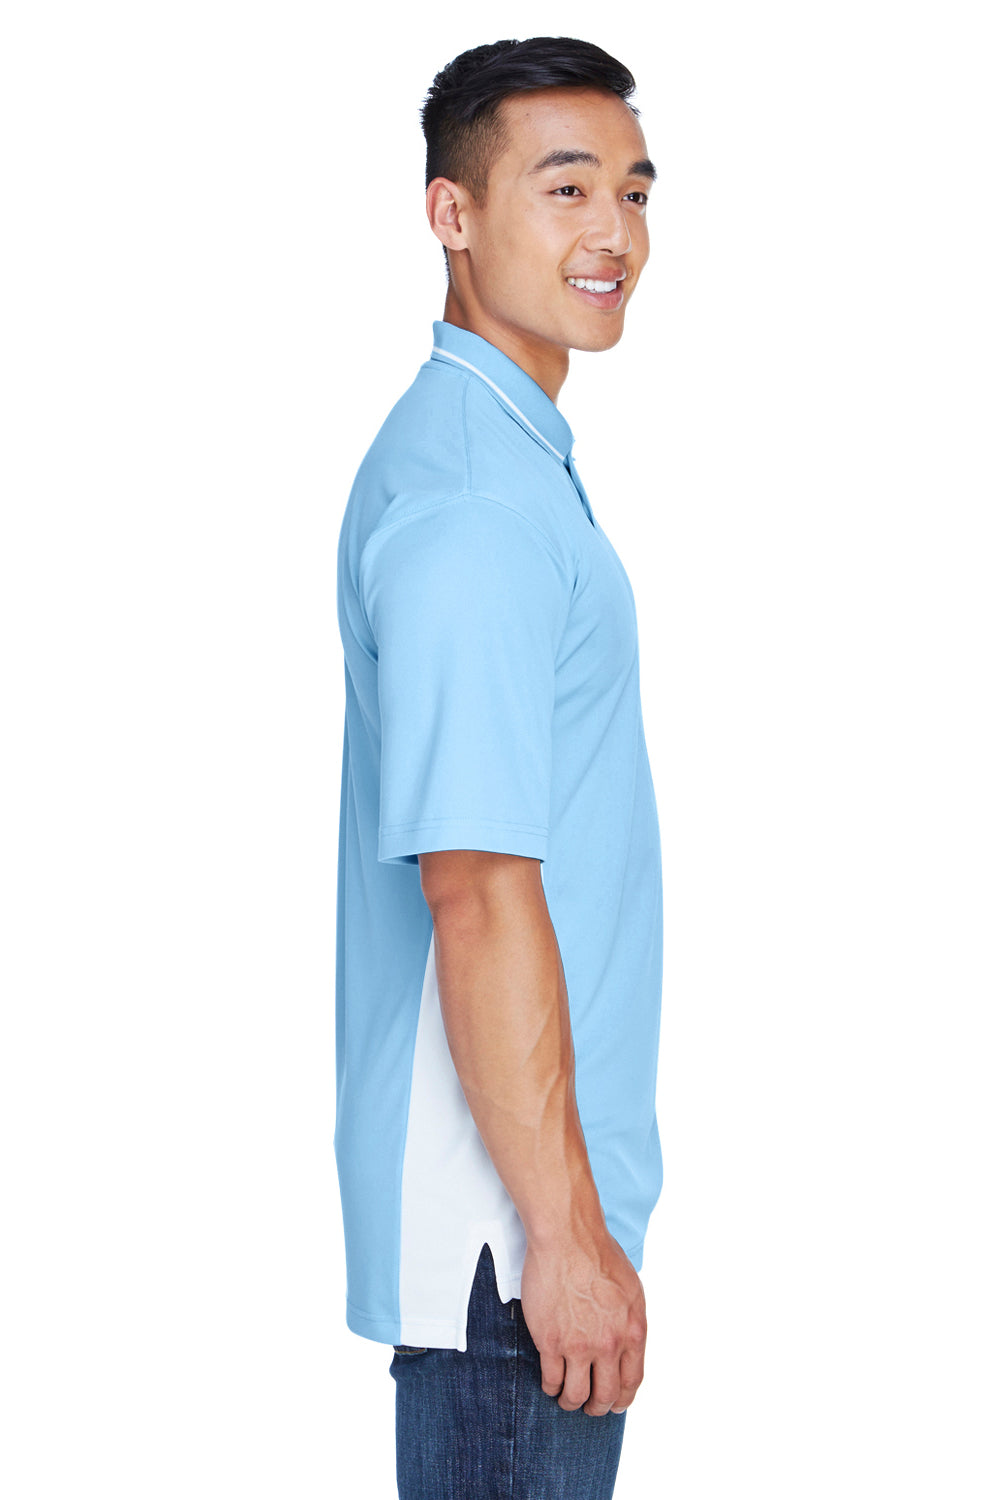 UltraClub 8406 Mens Cool & Dry Moisture Wicking Short Sleeve Polo Shirt Columbia Blue/White Side